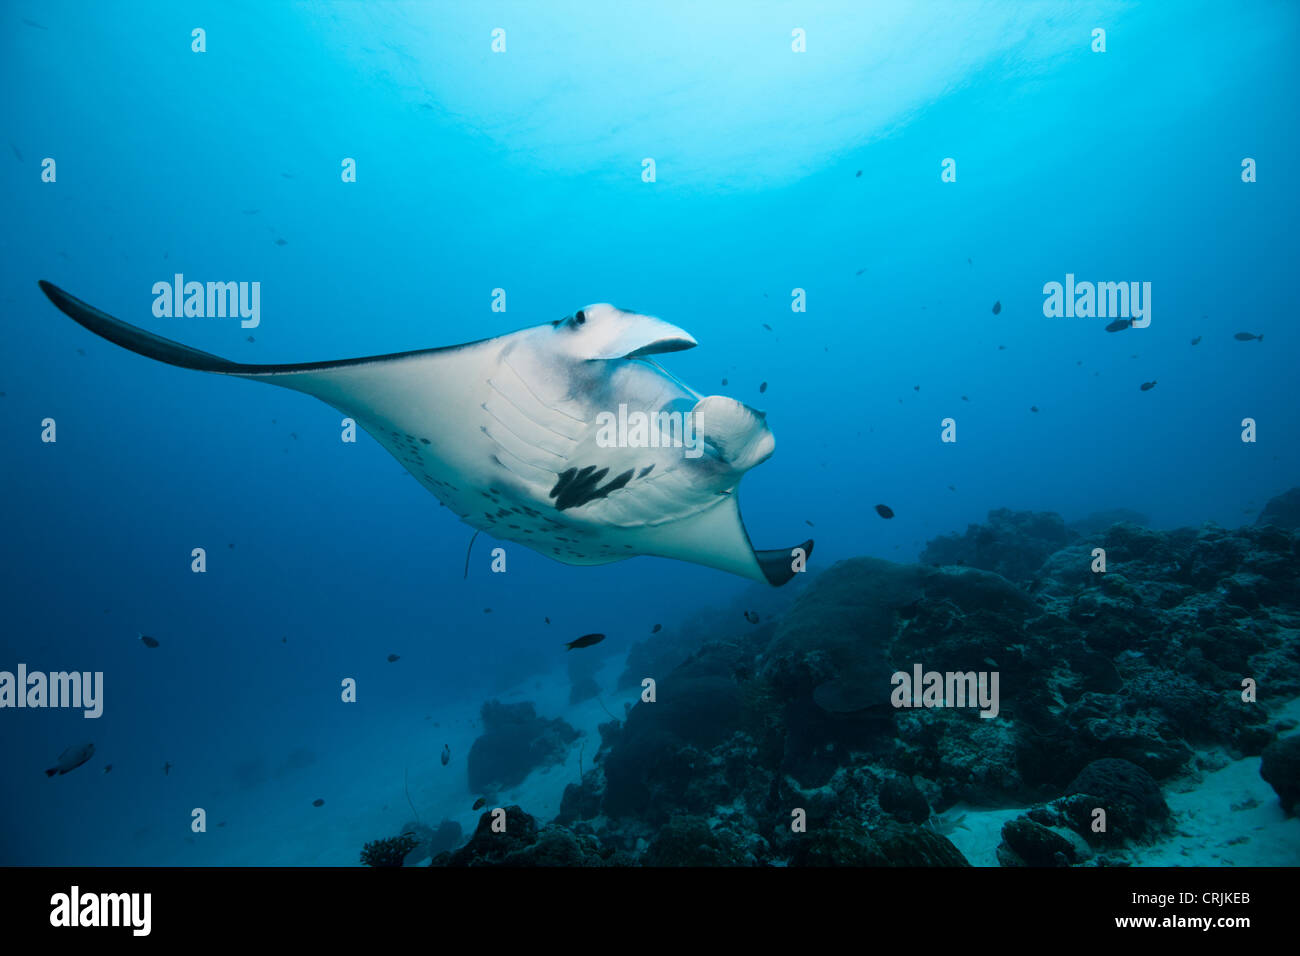 Giant Manta (Manta birostris) swimming near a cleaning station in the German Channel off the islands of Palau in Micronesia. Stock Photo